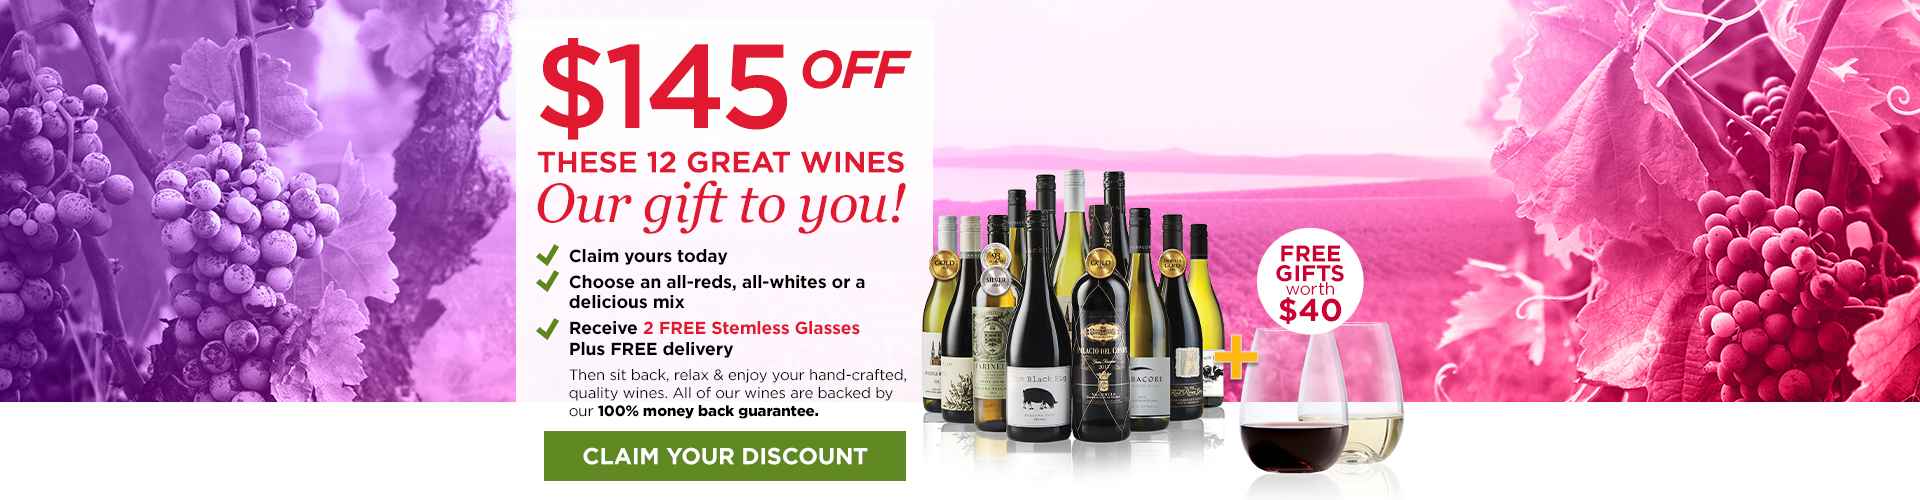 Save $145 on 12 great wines + 2 Free Stemless glasses